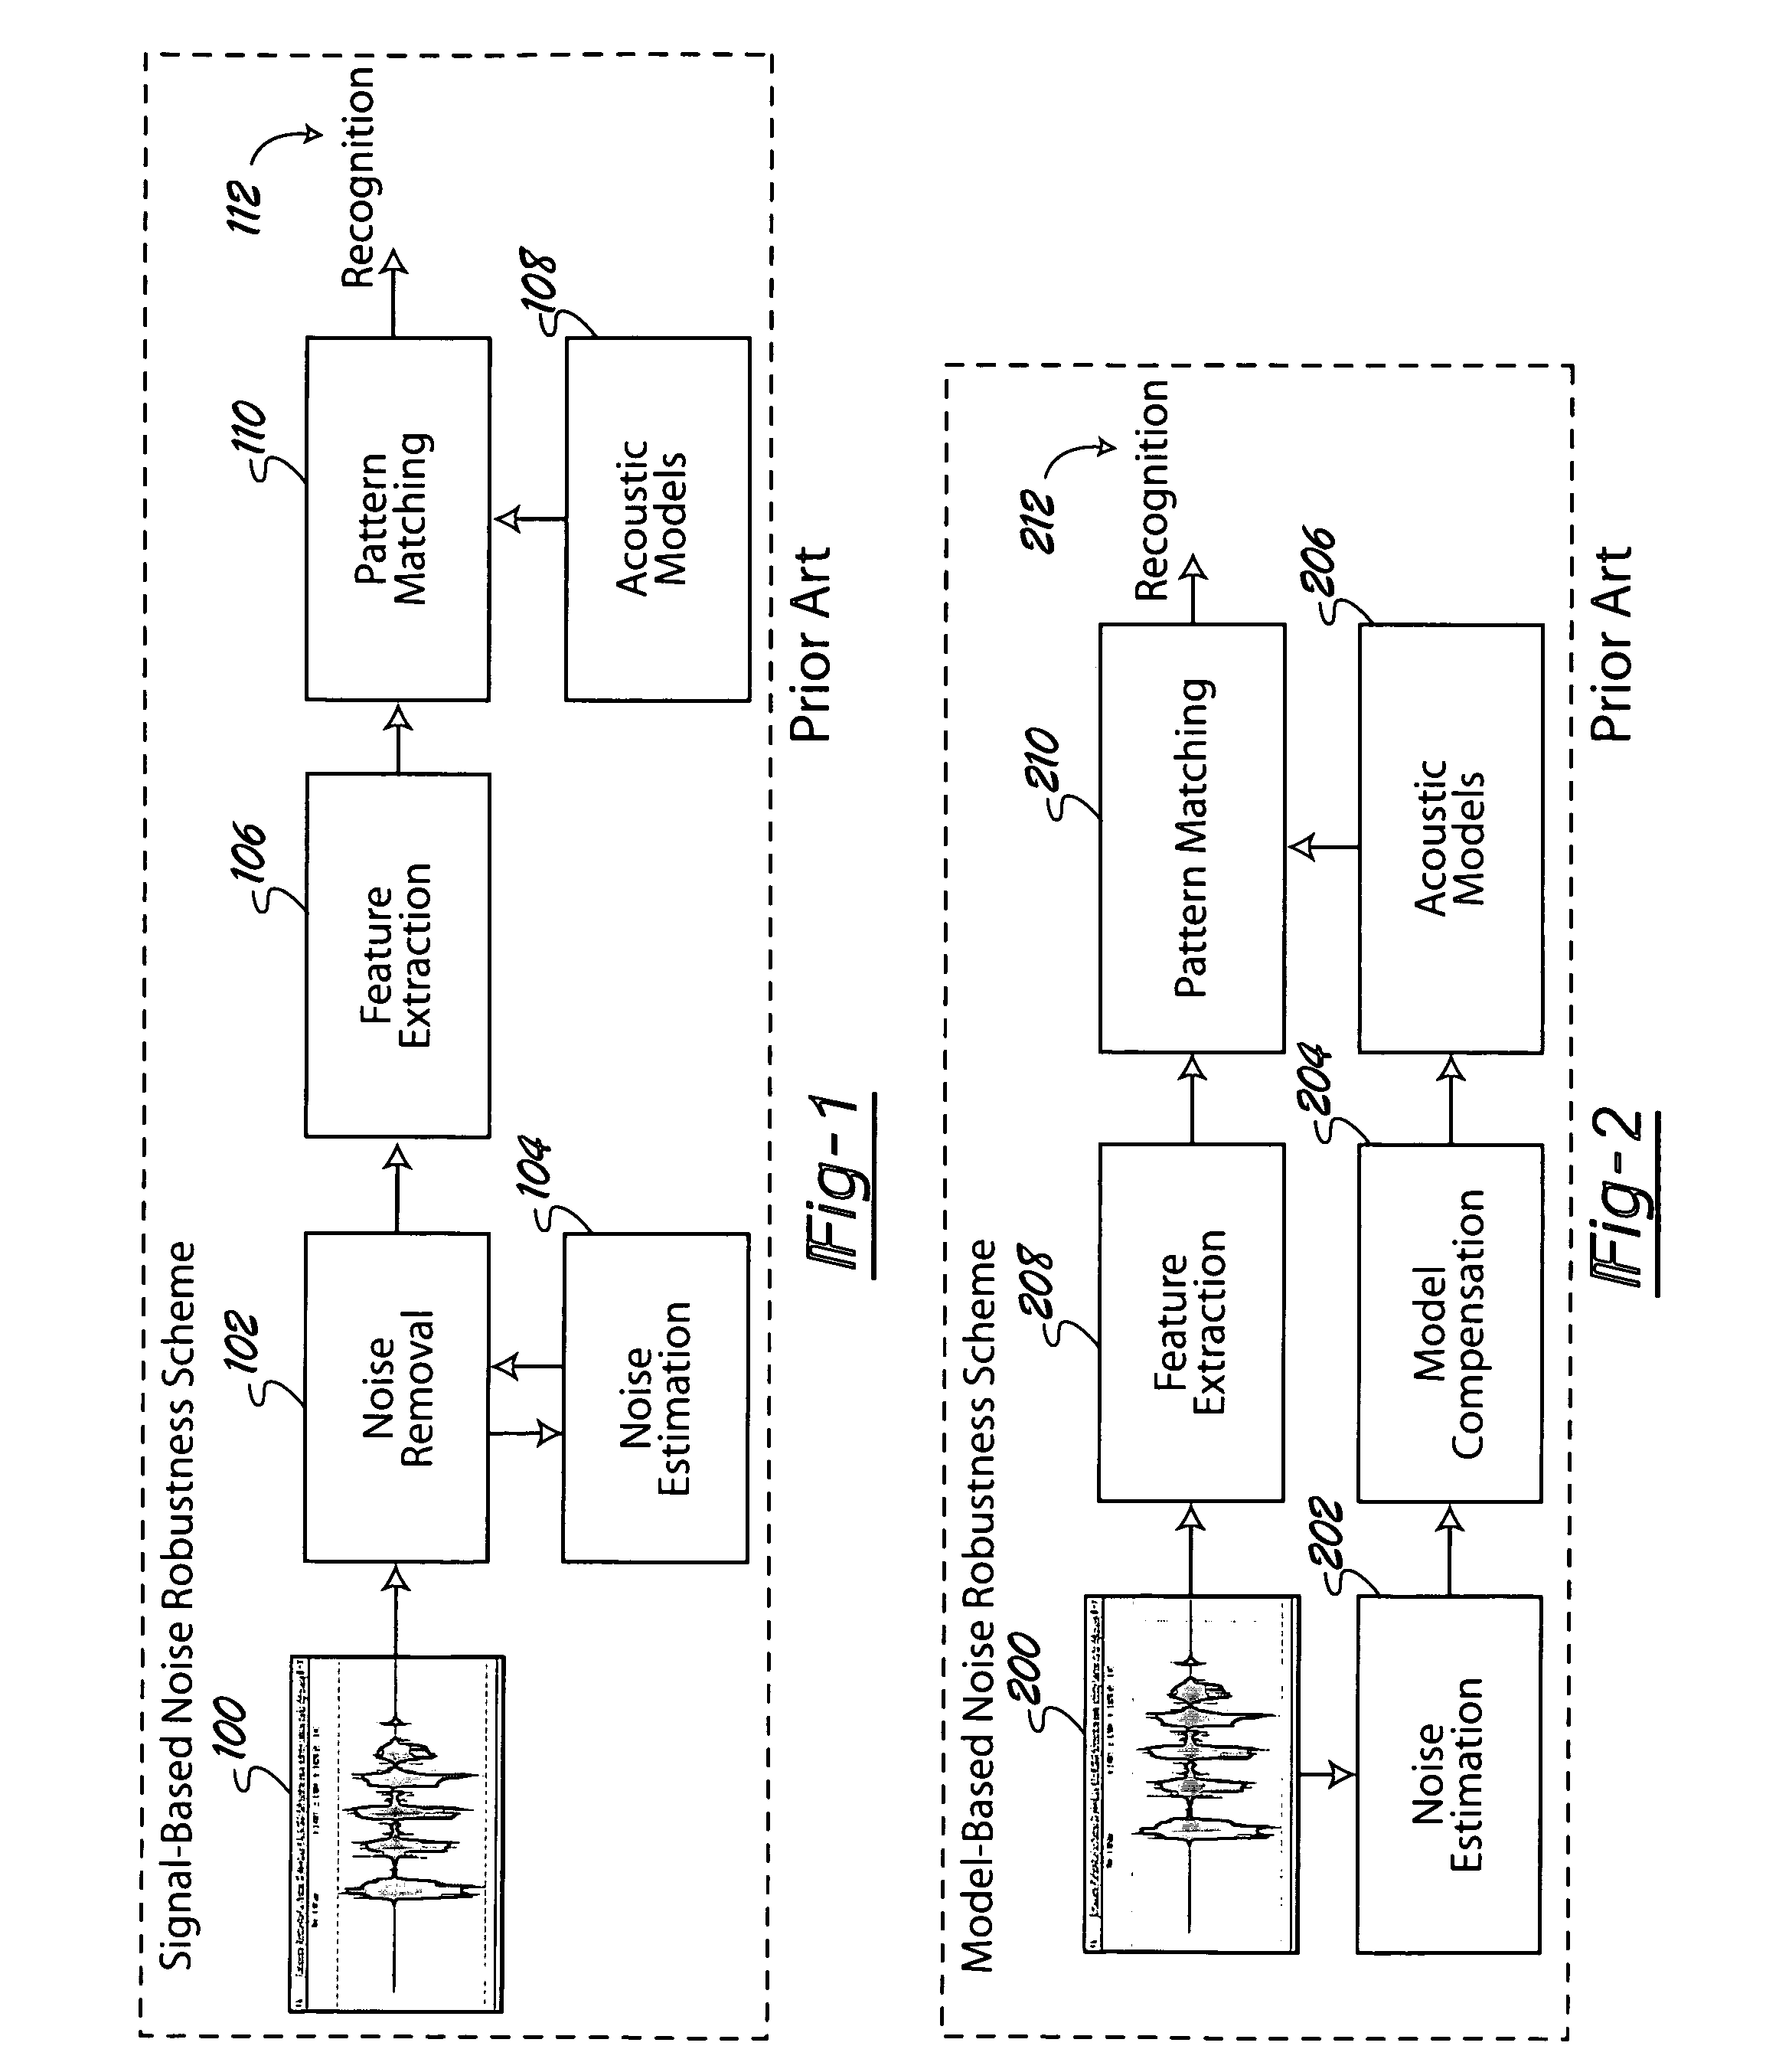 Joint signal and model based noise matching noise robustness method for automatic speech recognition